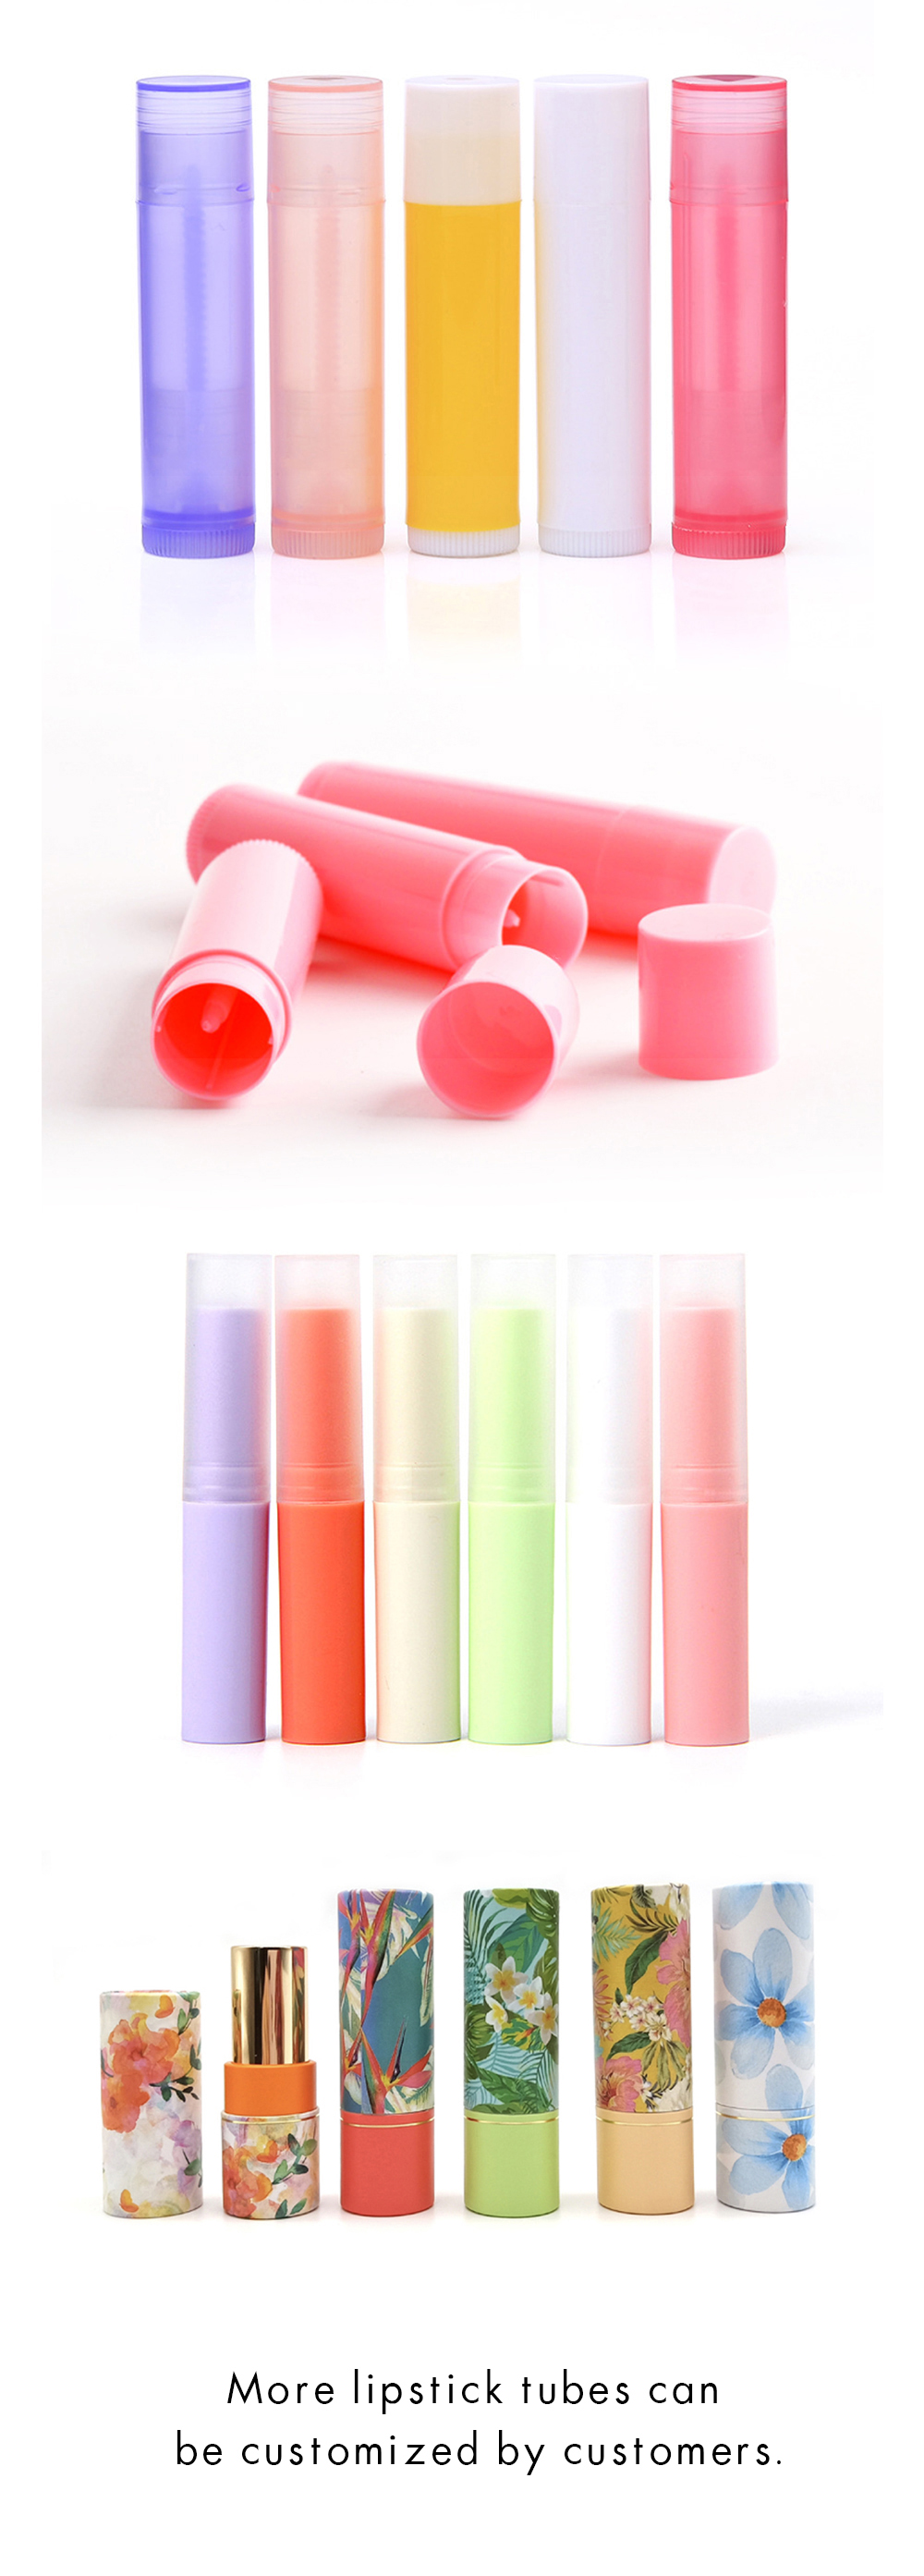 3. Color changing lipstick tube2